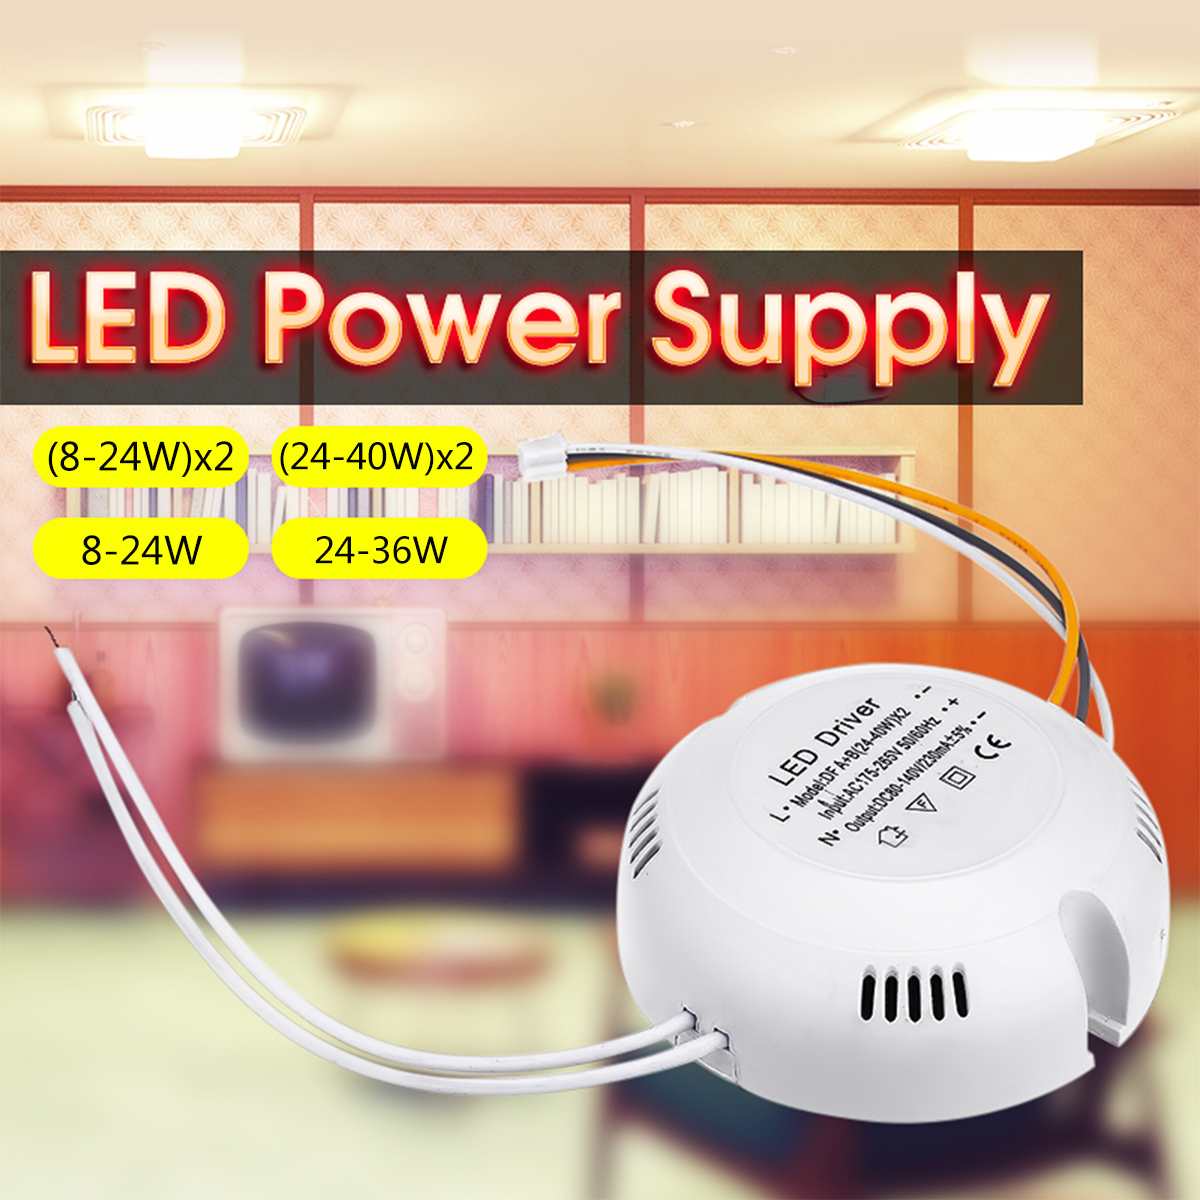 1 Pcs Led Constant Driver Voeding 8-36W 230mA Voeding Licht Transformator Voor Led Downlight Verlichting AC185-265V